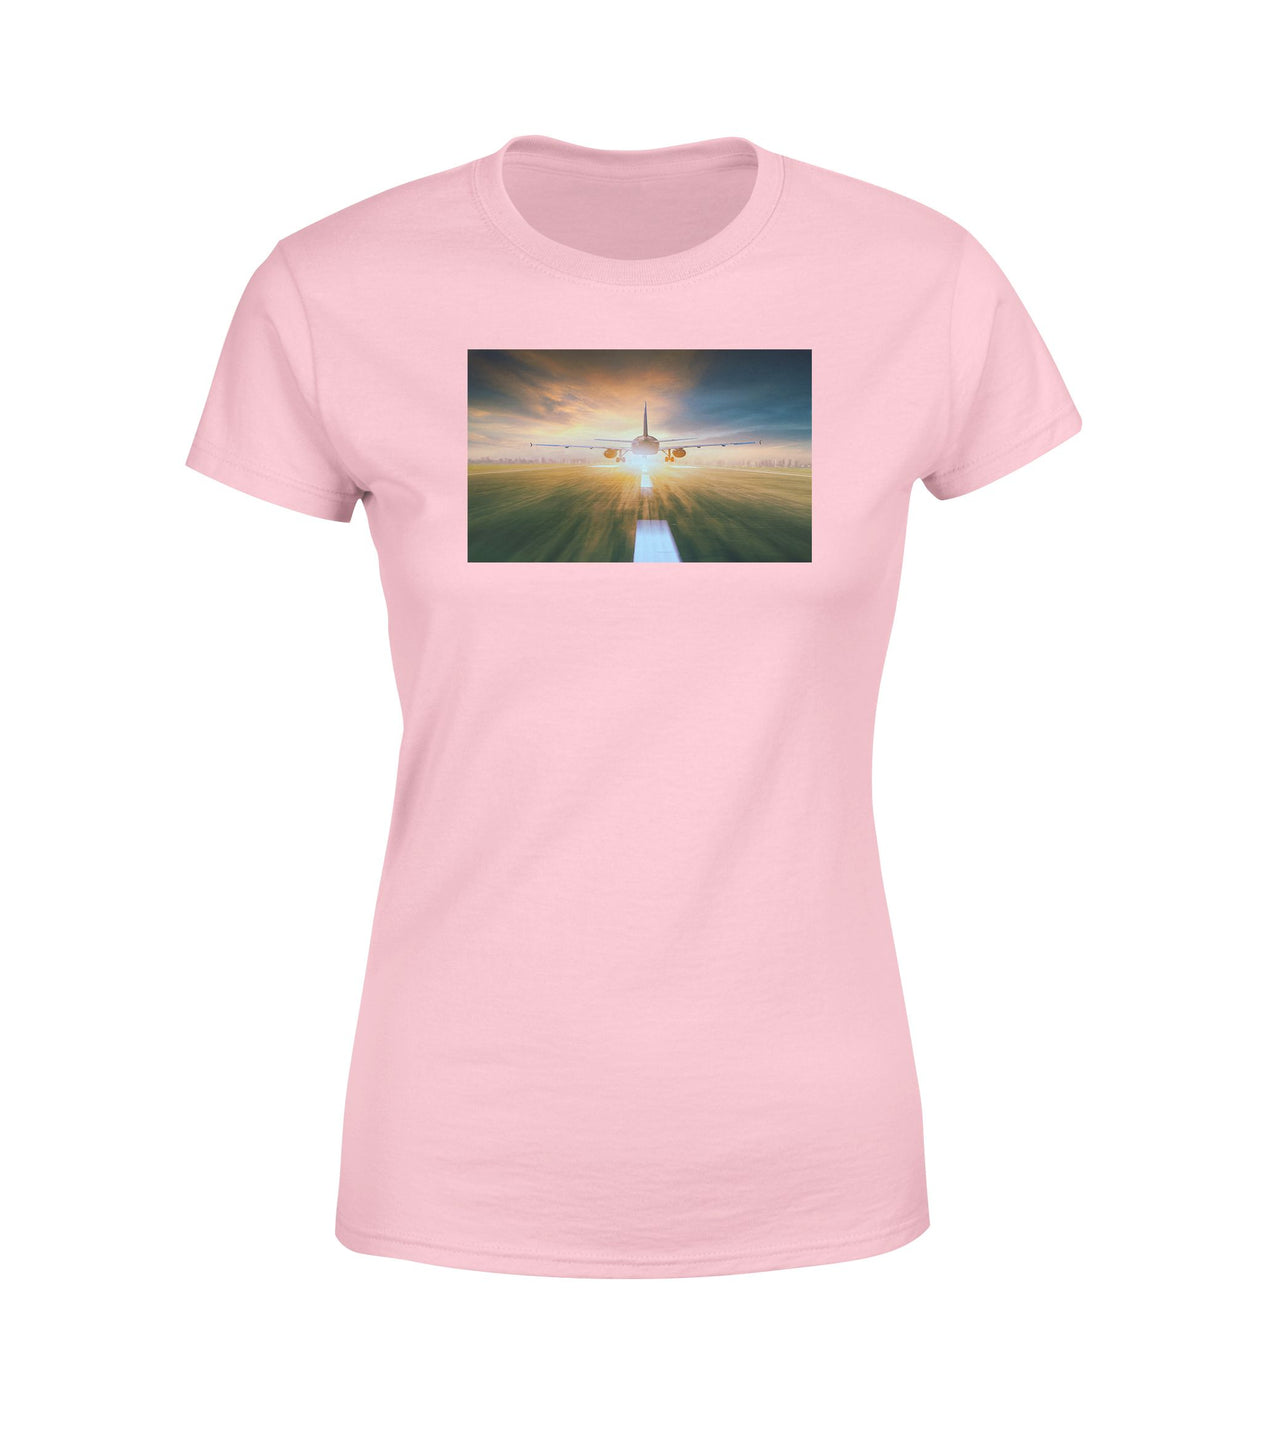 Airplane Flying Over Runway Designed Women T-Shirts